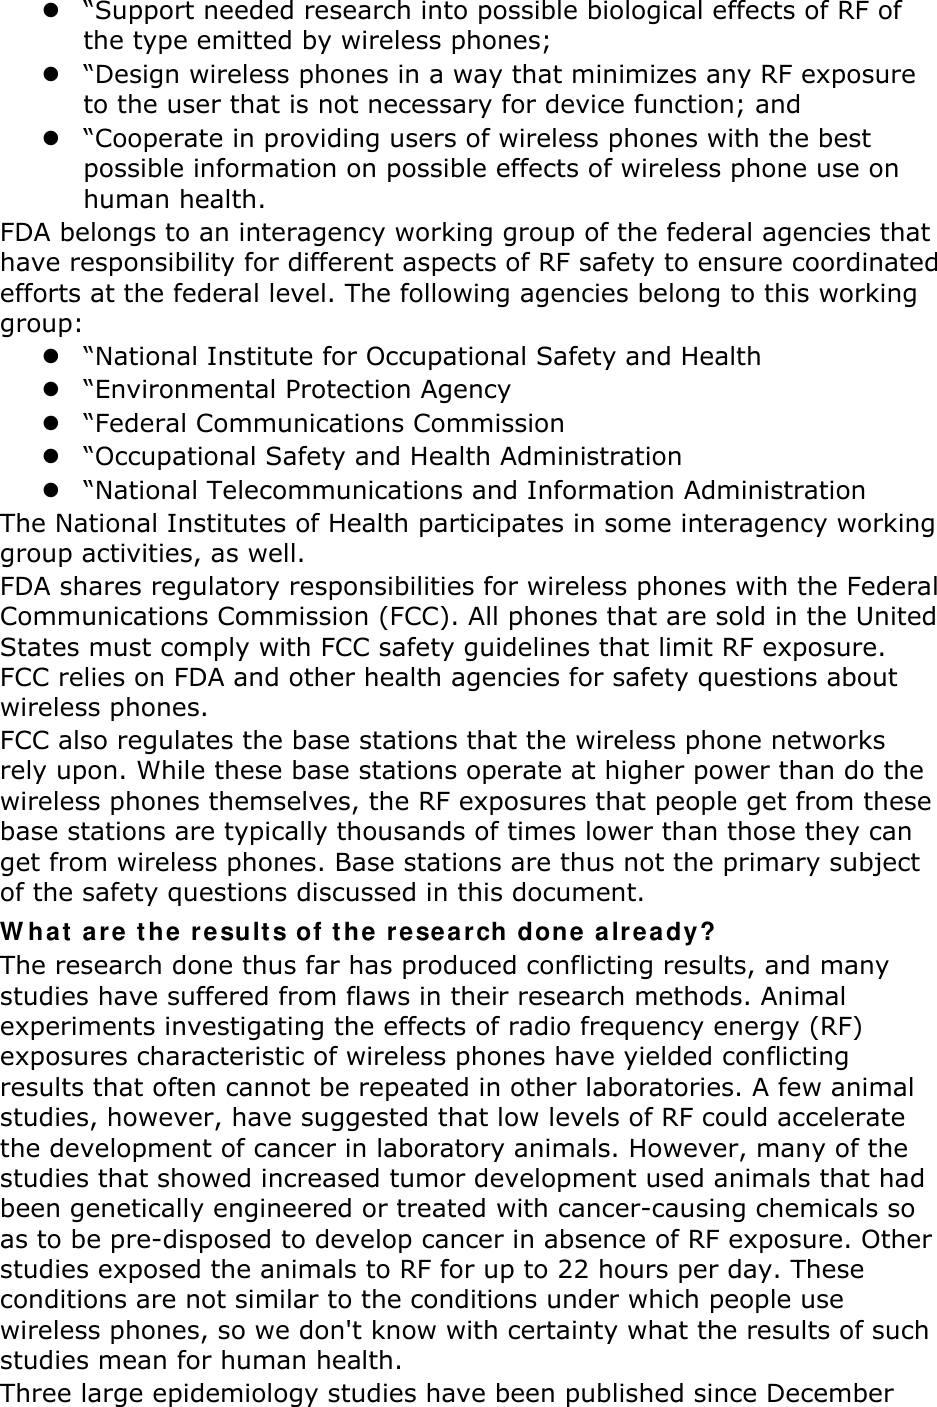 z “Support needed research into possible biological effects of RF of the type emitted by wireless phones; z “Design wireless phones in a way that minimizes any RF exposure to the user that is not necessary for device function; and z “Cooperate in providing users of wireless phones with the best possible information on possible effects of wireless phone use on human health. FDA belongs to an interagency working group of the federal agencies that have responsibility for different aspects of RF safety to ensure coordinated efforts at the federal level. The following agencies belong to this working group: z “National Institute for Occupational Safety and Health z “Environmental Protection Agency z “Federal Communications Commission z “Occupational Safety and Health Administration z “National Telecommunications and Information Administration The National Institutes of Health participates in some interagency working group activities, as well. FDA shares regulatory responsibilities for wireless phones with the Federal Communications Commission (FCC). All phones that are sold in the United States must comply with FCC safety guidelines that limit RF exposure. FCC relies on FDA and other health agencies for safety questions about wireless phones. FCC also regulates the base stations that the wireless phone networks rely upon. While these base stations operate at higher power than do the wireless phones themselves, the RF exposures that people get from these base stations are typically thousands of times lower than those they can get from wireless phones. Base stations are thus not the primary subject of the safety questions discussed in this document. W hat ar e t he result s of t he  re sear ch done already? The research done thus far has produced conflicting results, and many studies have suffered from flaws in their research methods. Animal experiments investigating the effects of radio frequency energy (RF) exposures characteristic of wireless phones have yielded conflicting results that often cannot be repeated in other laboratories. A few animal studies, however, have suggested that low levels of RF could accelerate the development of cancer in laboratory animals. However, many of the studies that showed increased tumor development used animals that had been genetically engineered or treated with cancer-causing chemicals so as to be pre-disposed to develop cancer in absence of RF exposure. Other studies exposed the animals to RF for up to 22 hours per day. These conditions are not similar to the conditions under which people use wireless phones, so we don&apos;t know with certainty what the results of such studies mean for human health. Three large epidemiology studies have been published since December 